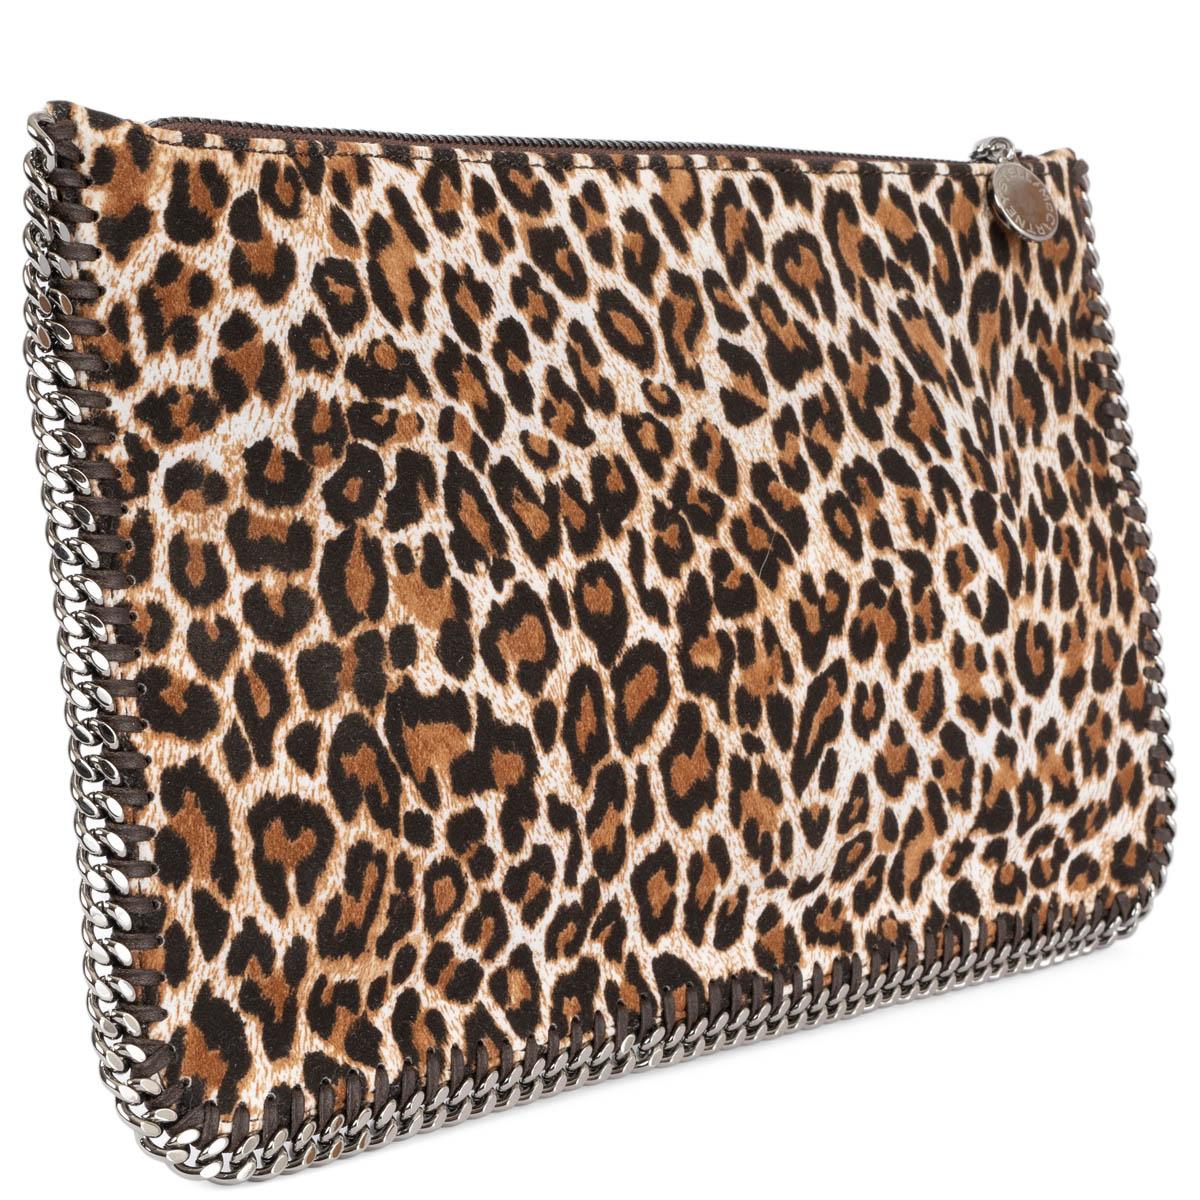 100% authentic Stella McCartney Falabella leopard print clutch in espresso brown, brown and cream alcantara with silver-tone metal chain trim. Opens with a zipper on top and is lined in black logo nylon with a slit pocket against the back. Has been